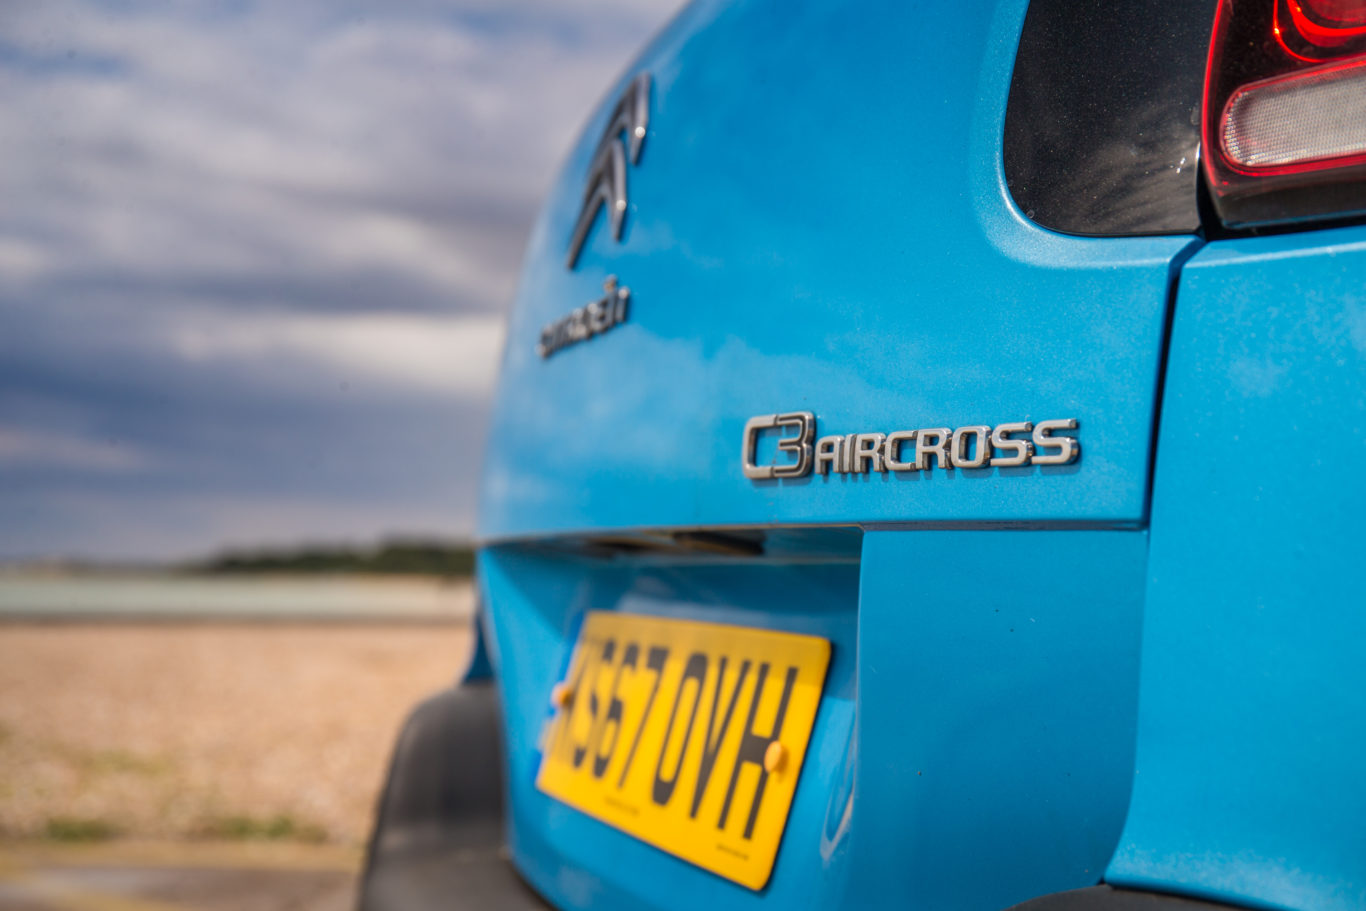 The Aircross is another compact SUV to enter the market